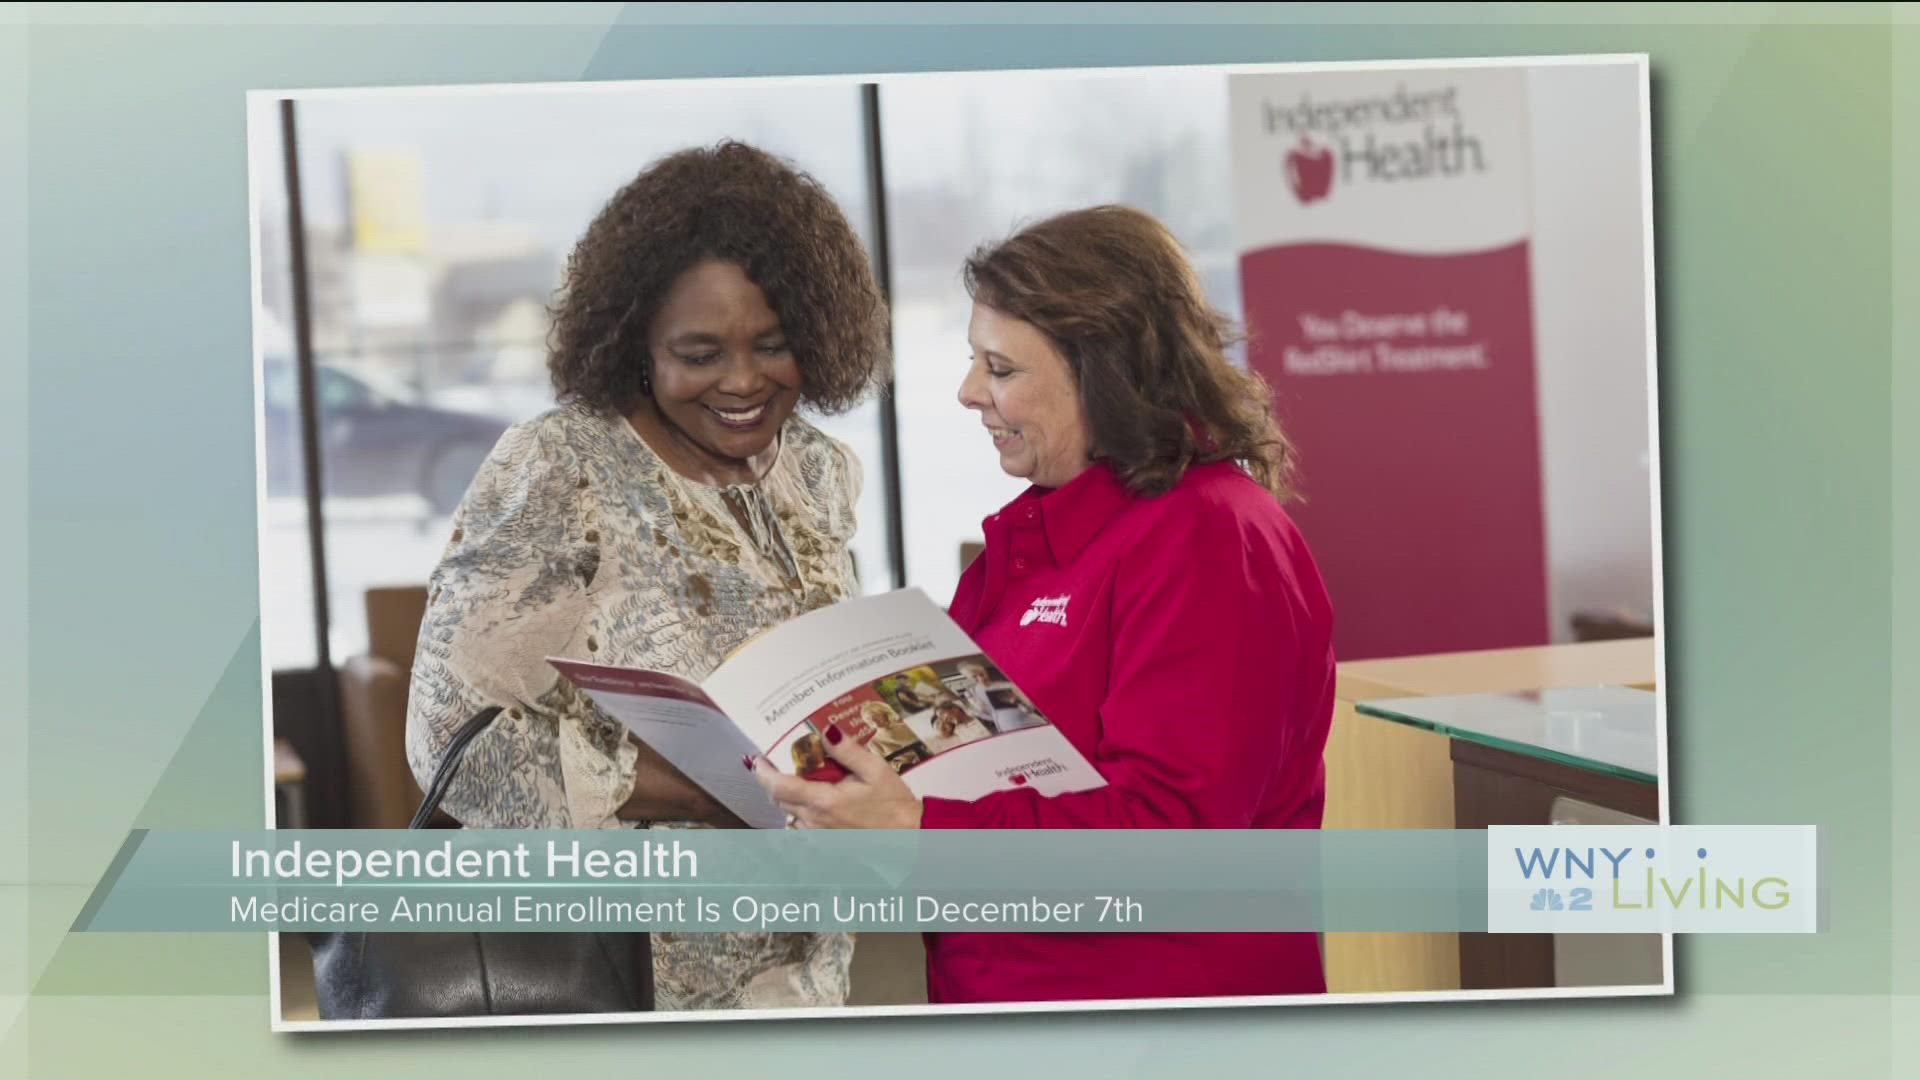 WNY Living - November 26 - Independent Health (THIS VIDEO IS SPONSORED BY INDEPENDENT HEALTH)